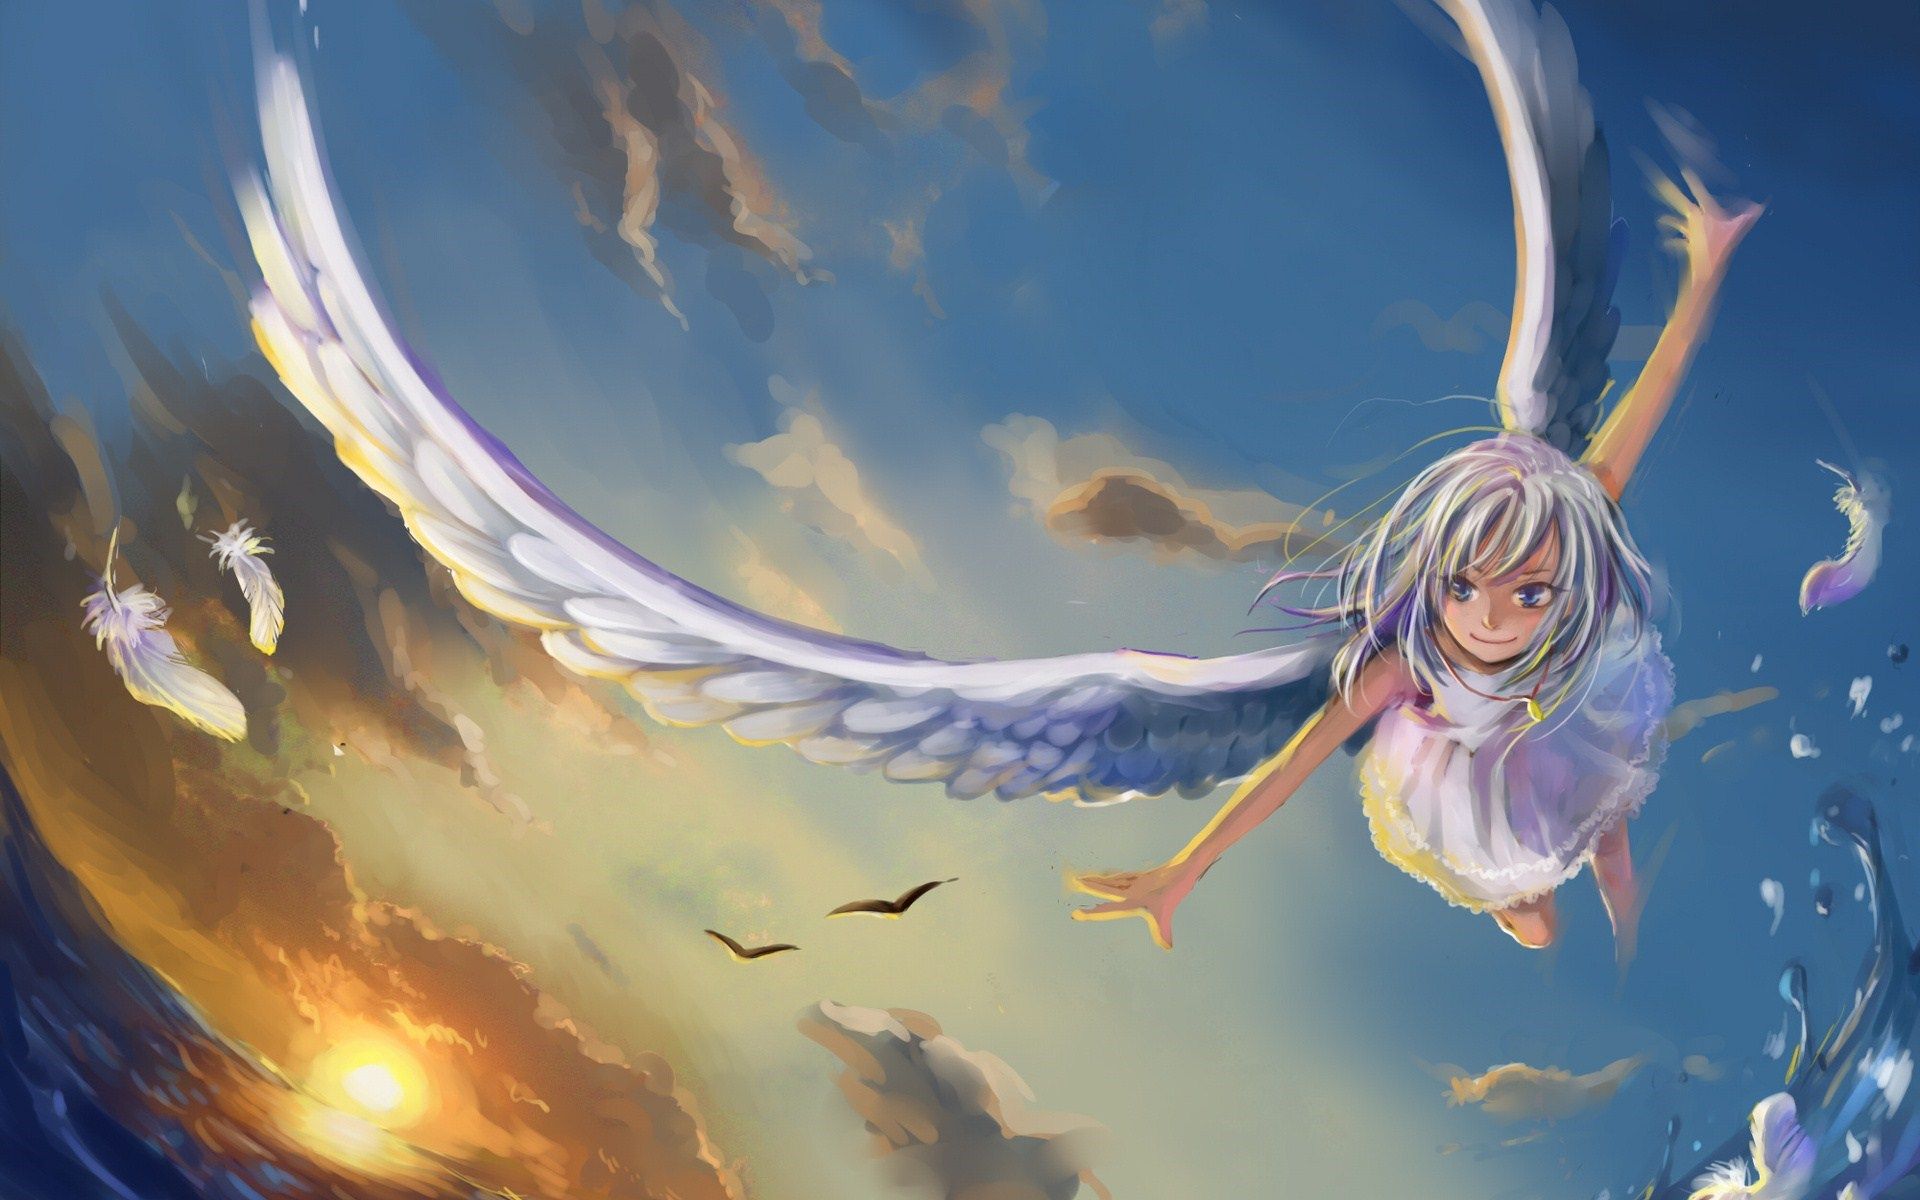 An anime girl with white hair and wings flying in the sky - Wings